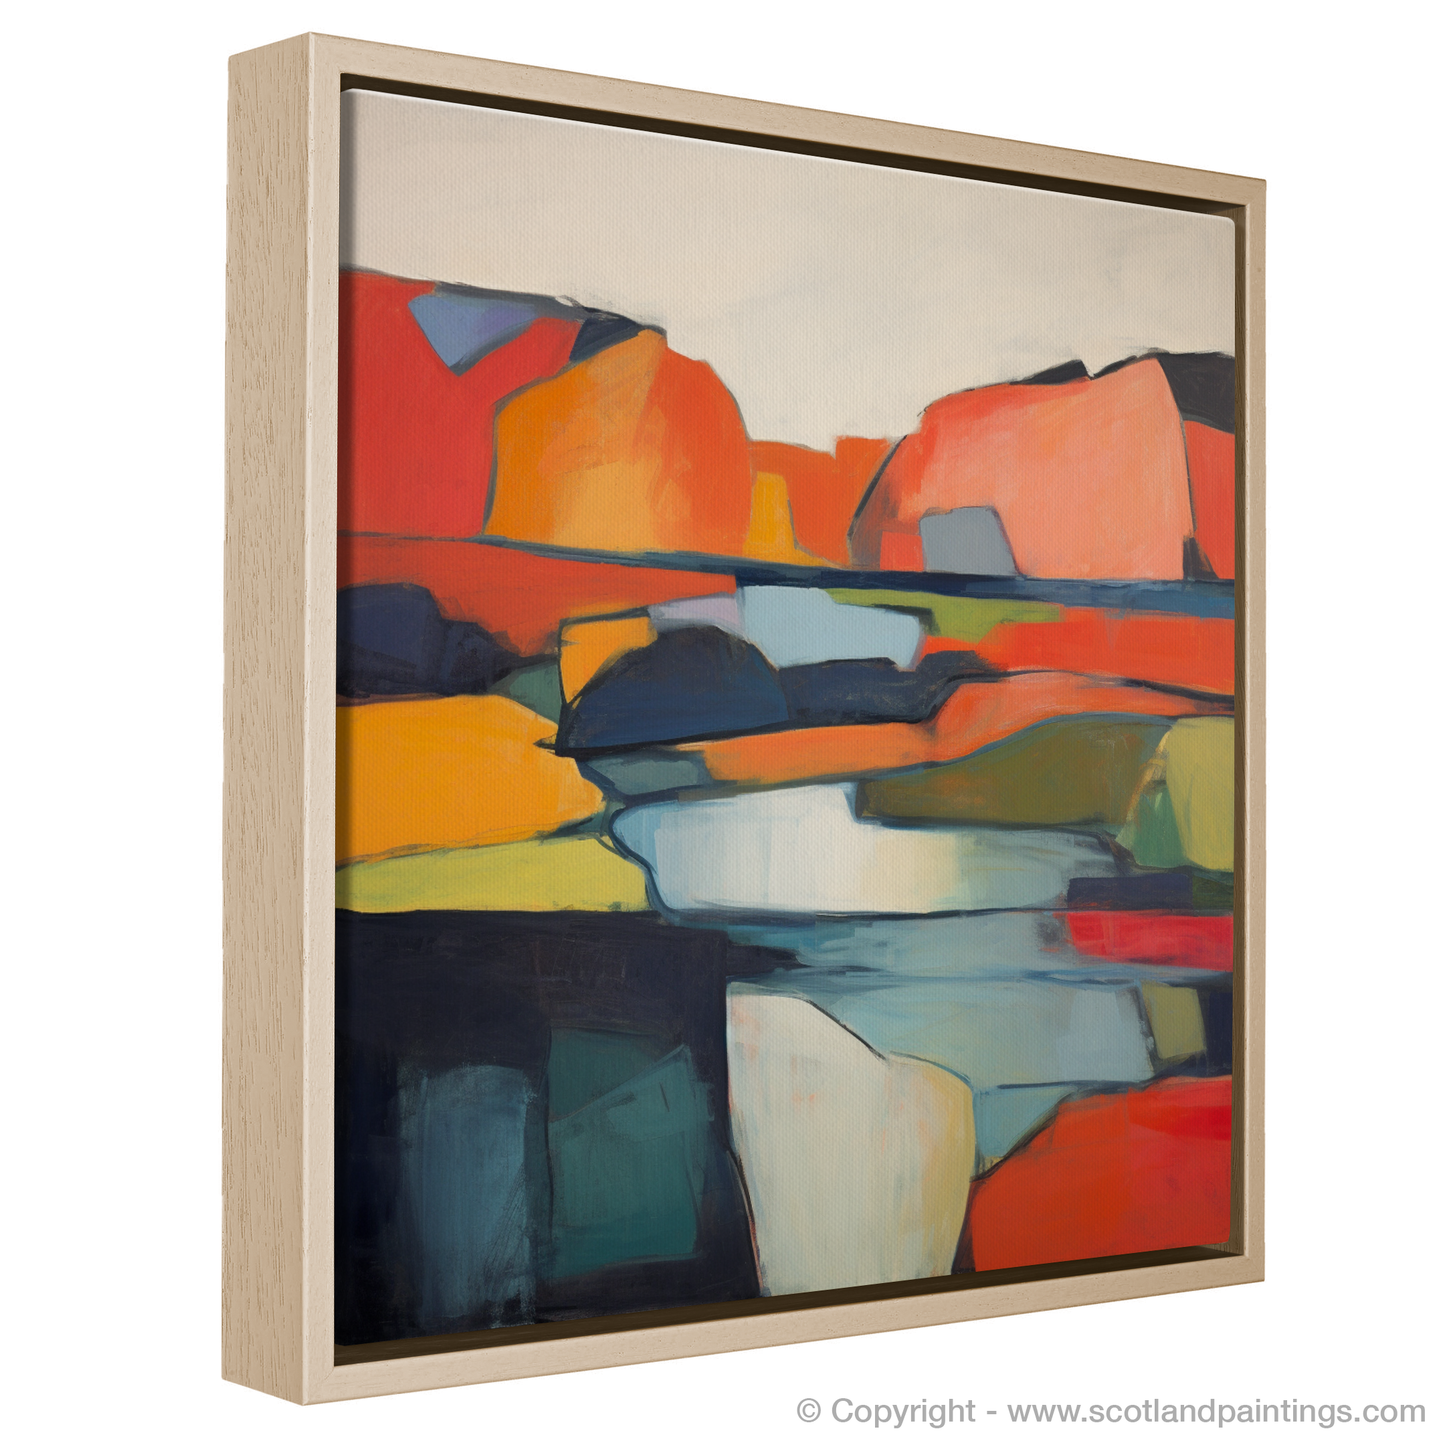 Painting and Art Print of A loch in Scotland entitled "Scottish Loch at Sunset: An Abstract Interpretation".